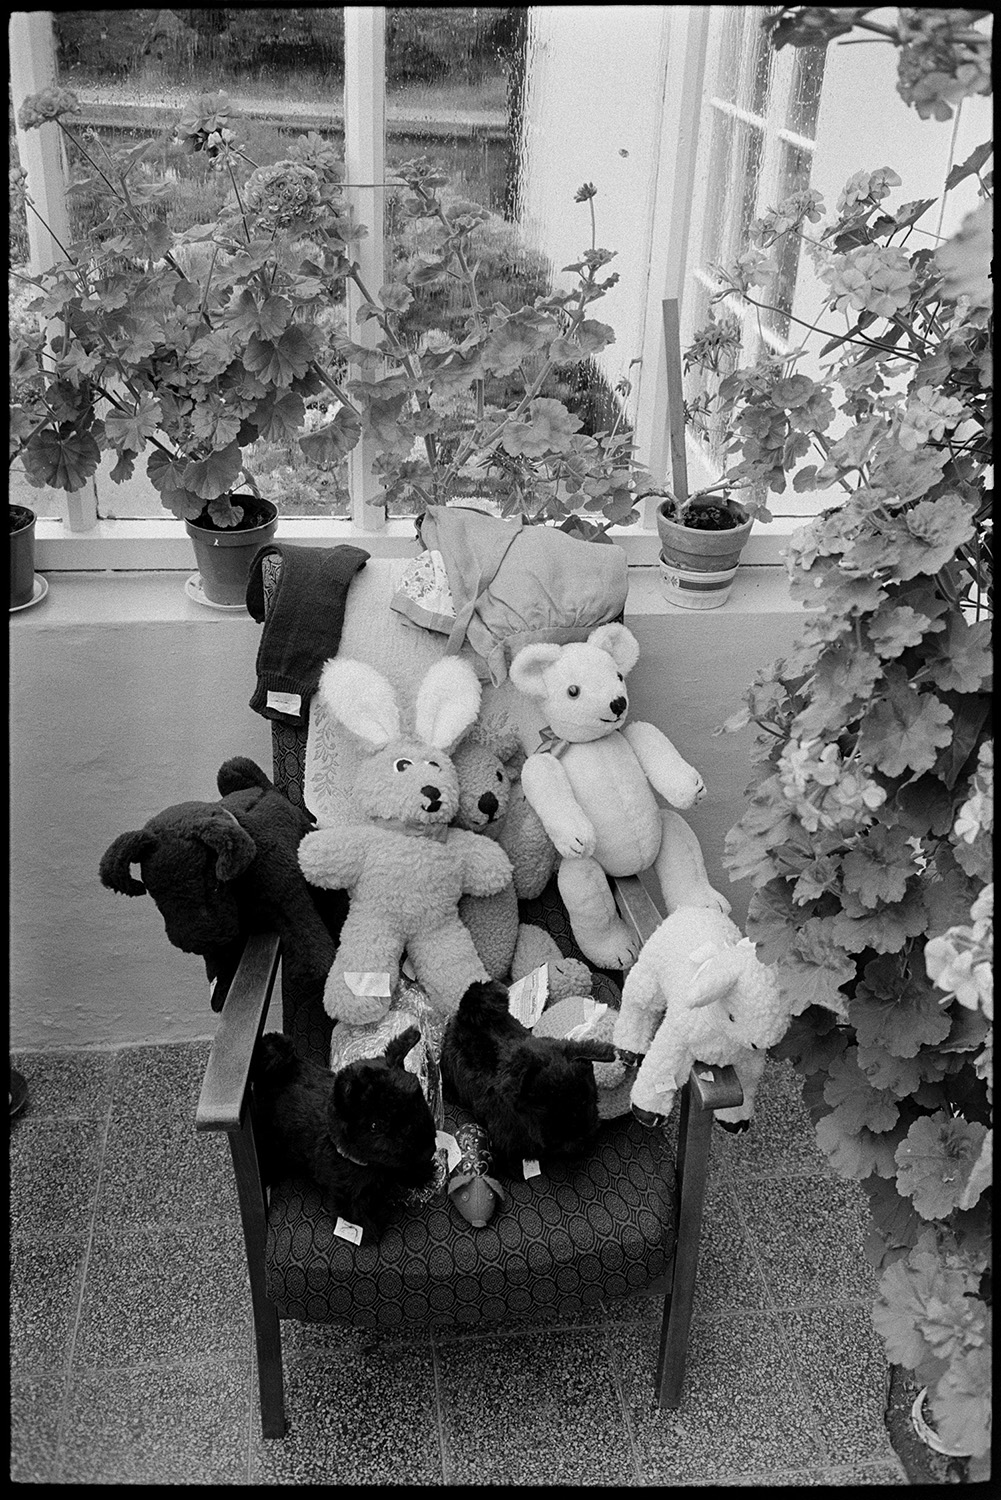 Vicarage fete, teddy bears on display. 
[Teddy bears on display in a chair in a conservatory at the vicarage fete at Merton Rectory. Geraniums are displayed around the conservatory.]